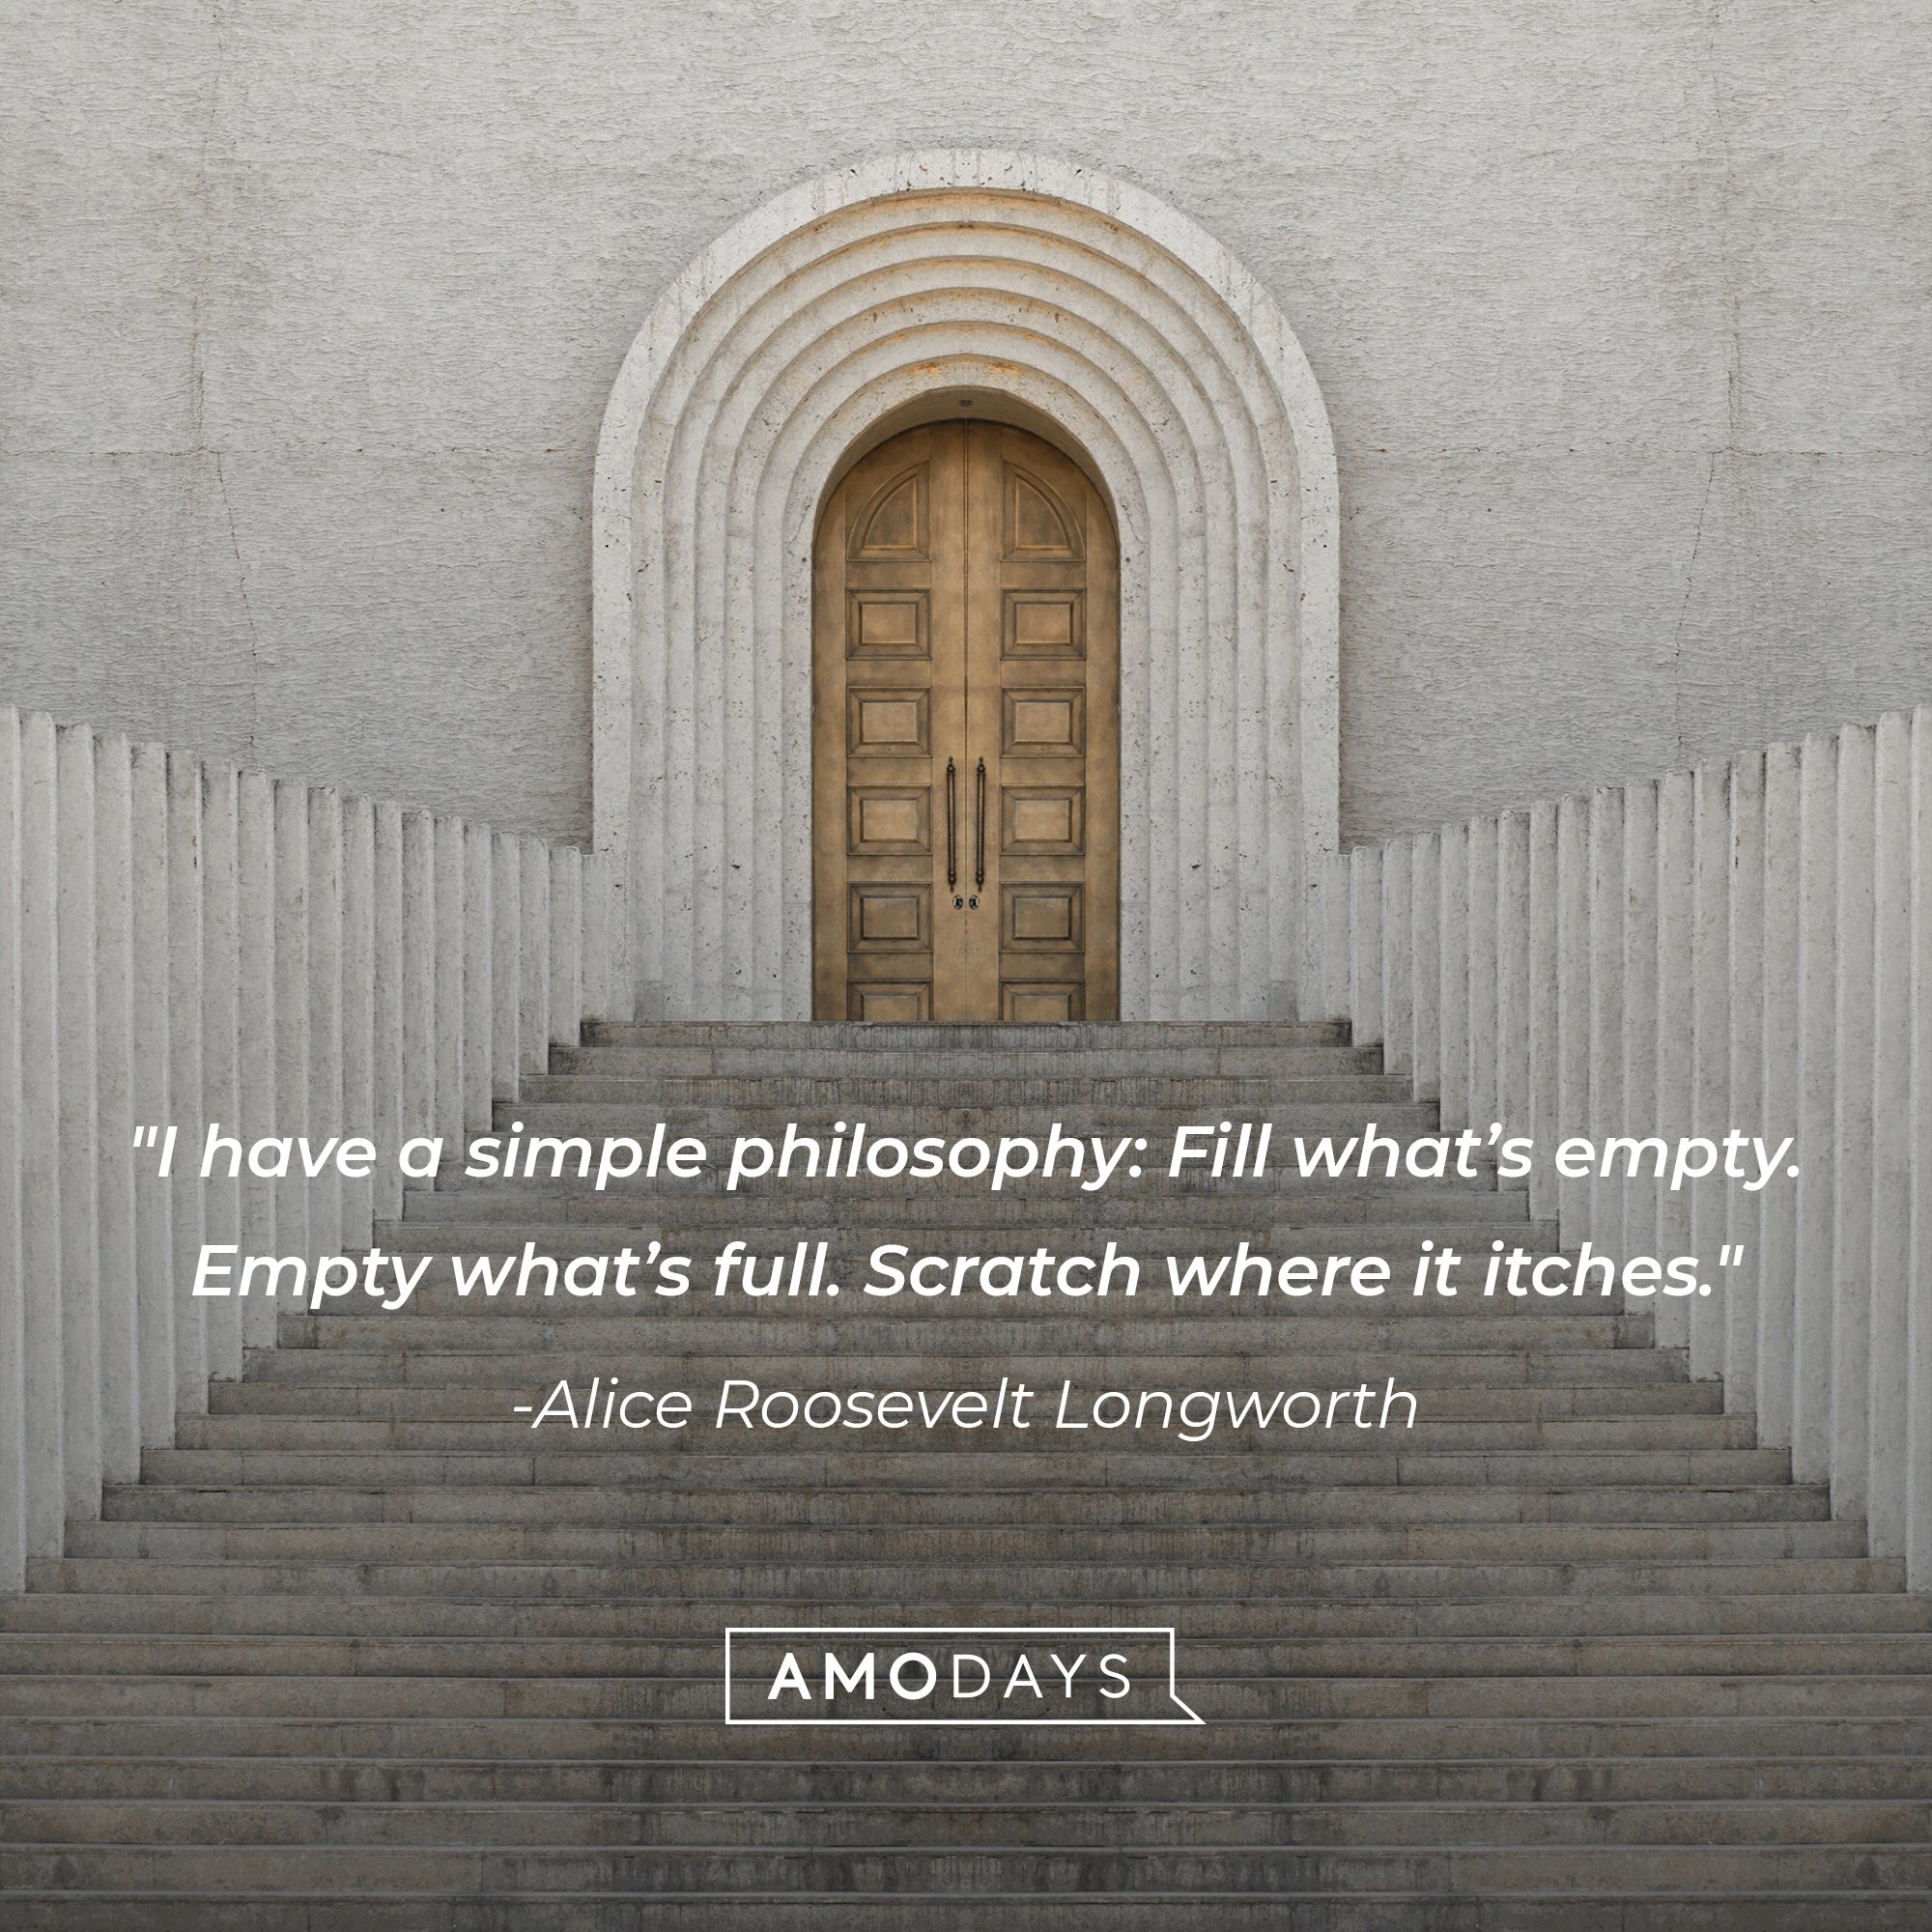 Alice Roosevelt Longworth 's quote: "I have a simple philosophy: Fill what’s empty. Empty what’s full. Scratch where it itches." | Image: AmoDays